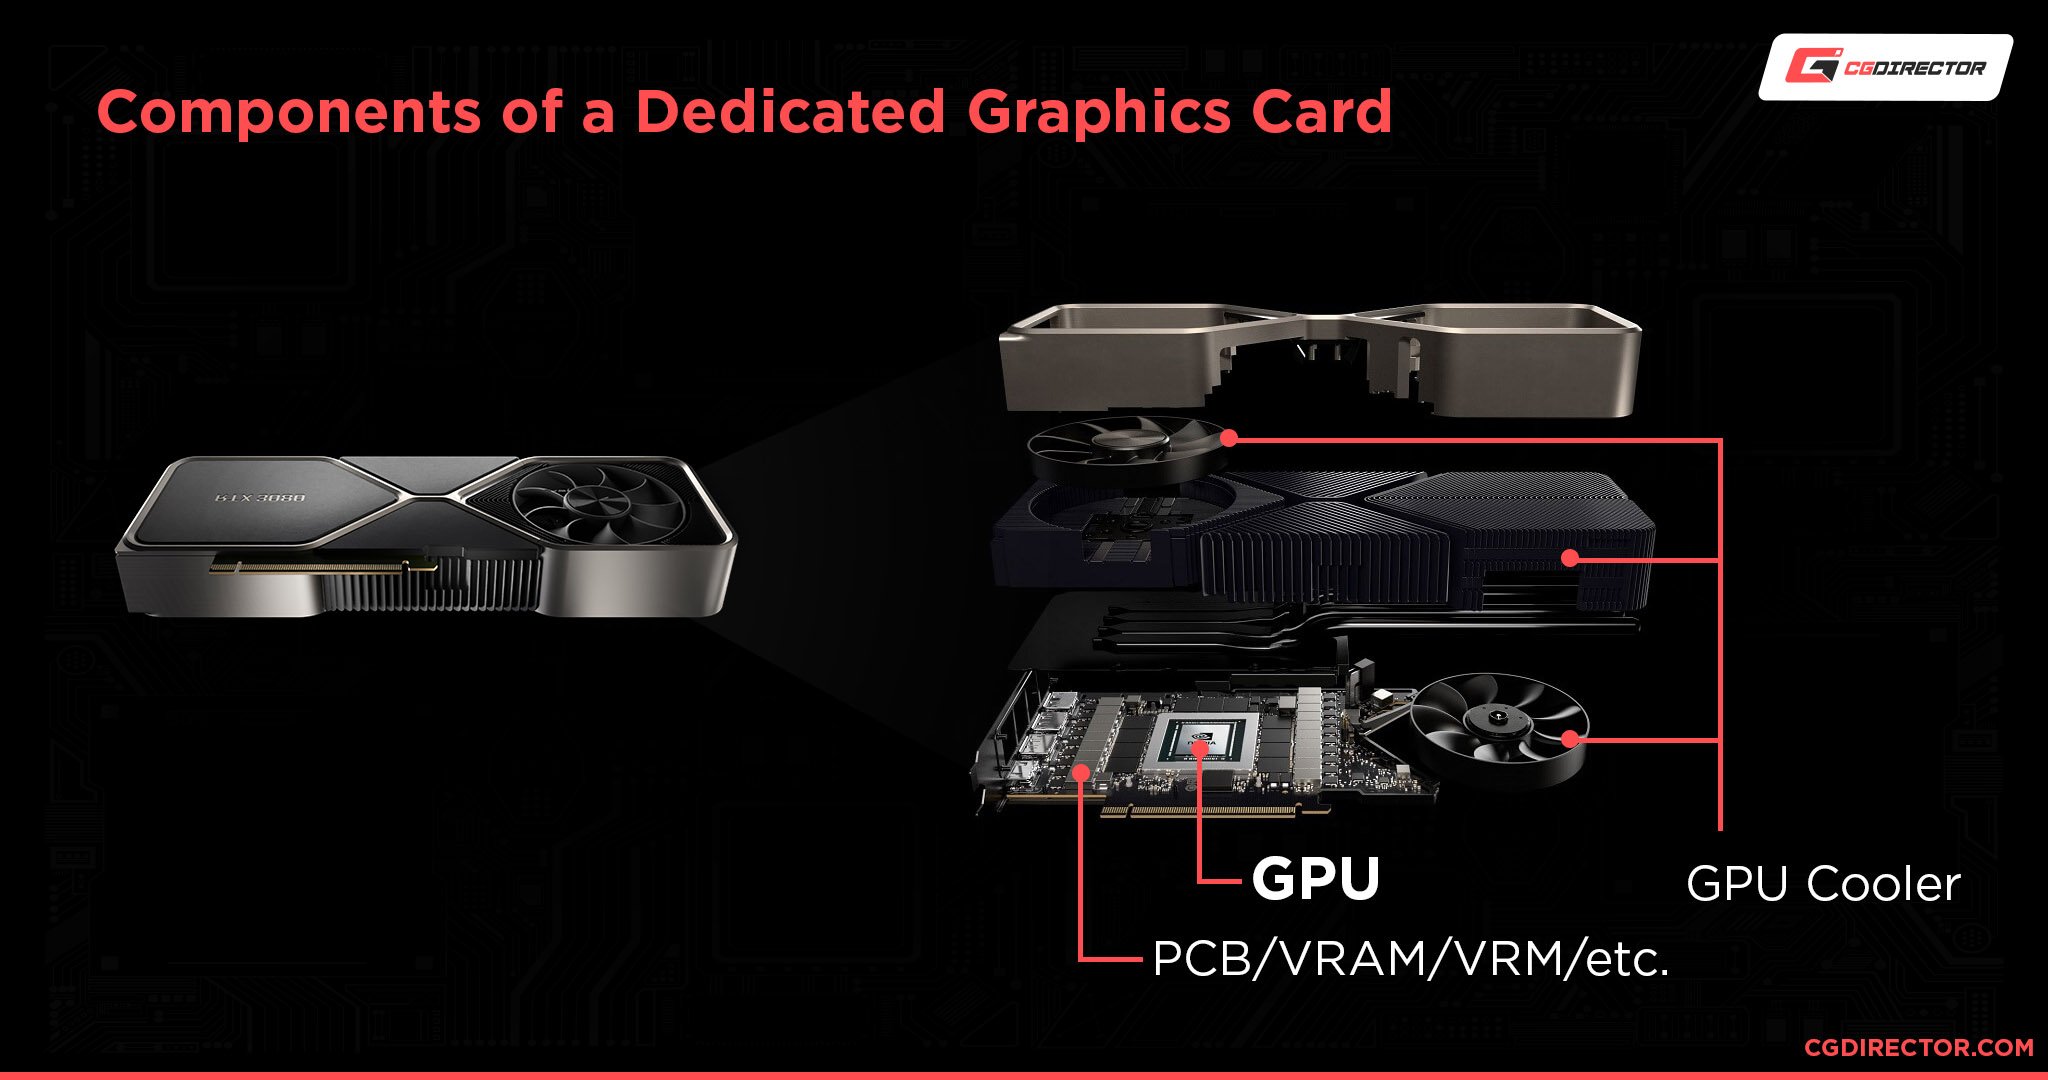 Components of a Dedicated Graphics Card